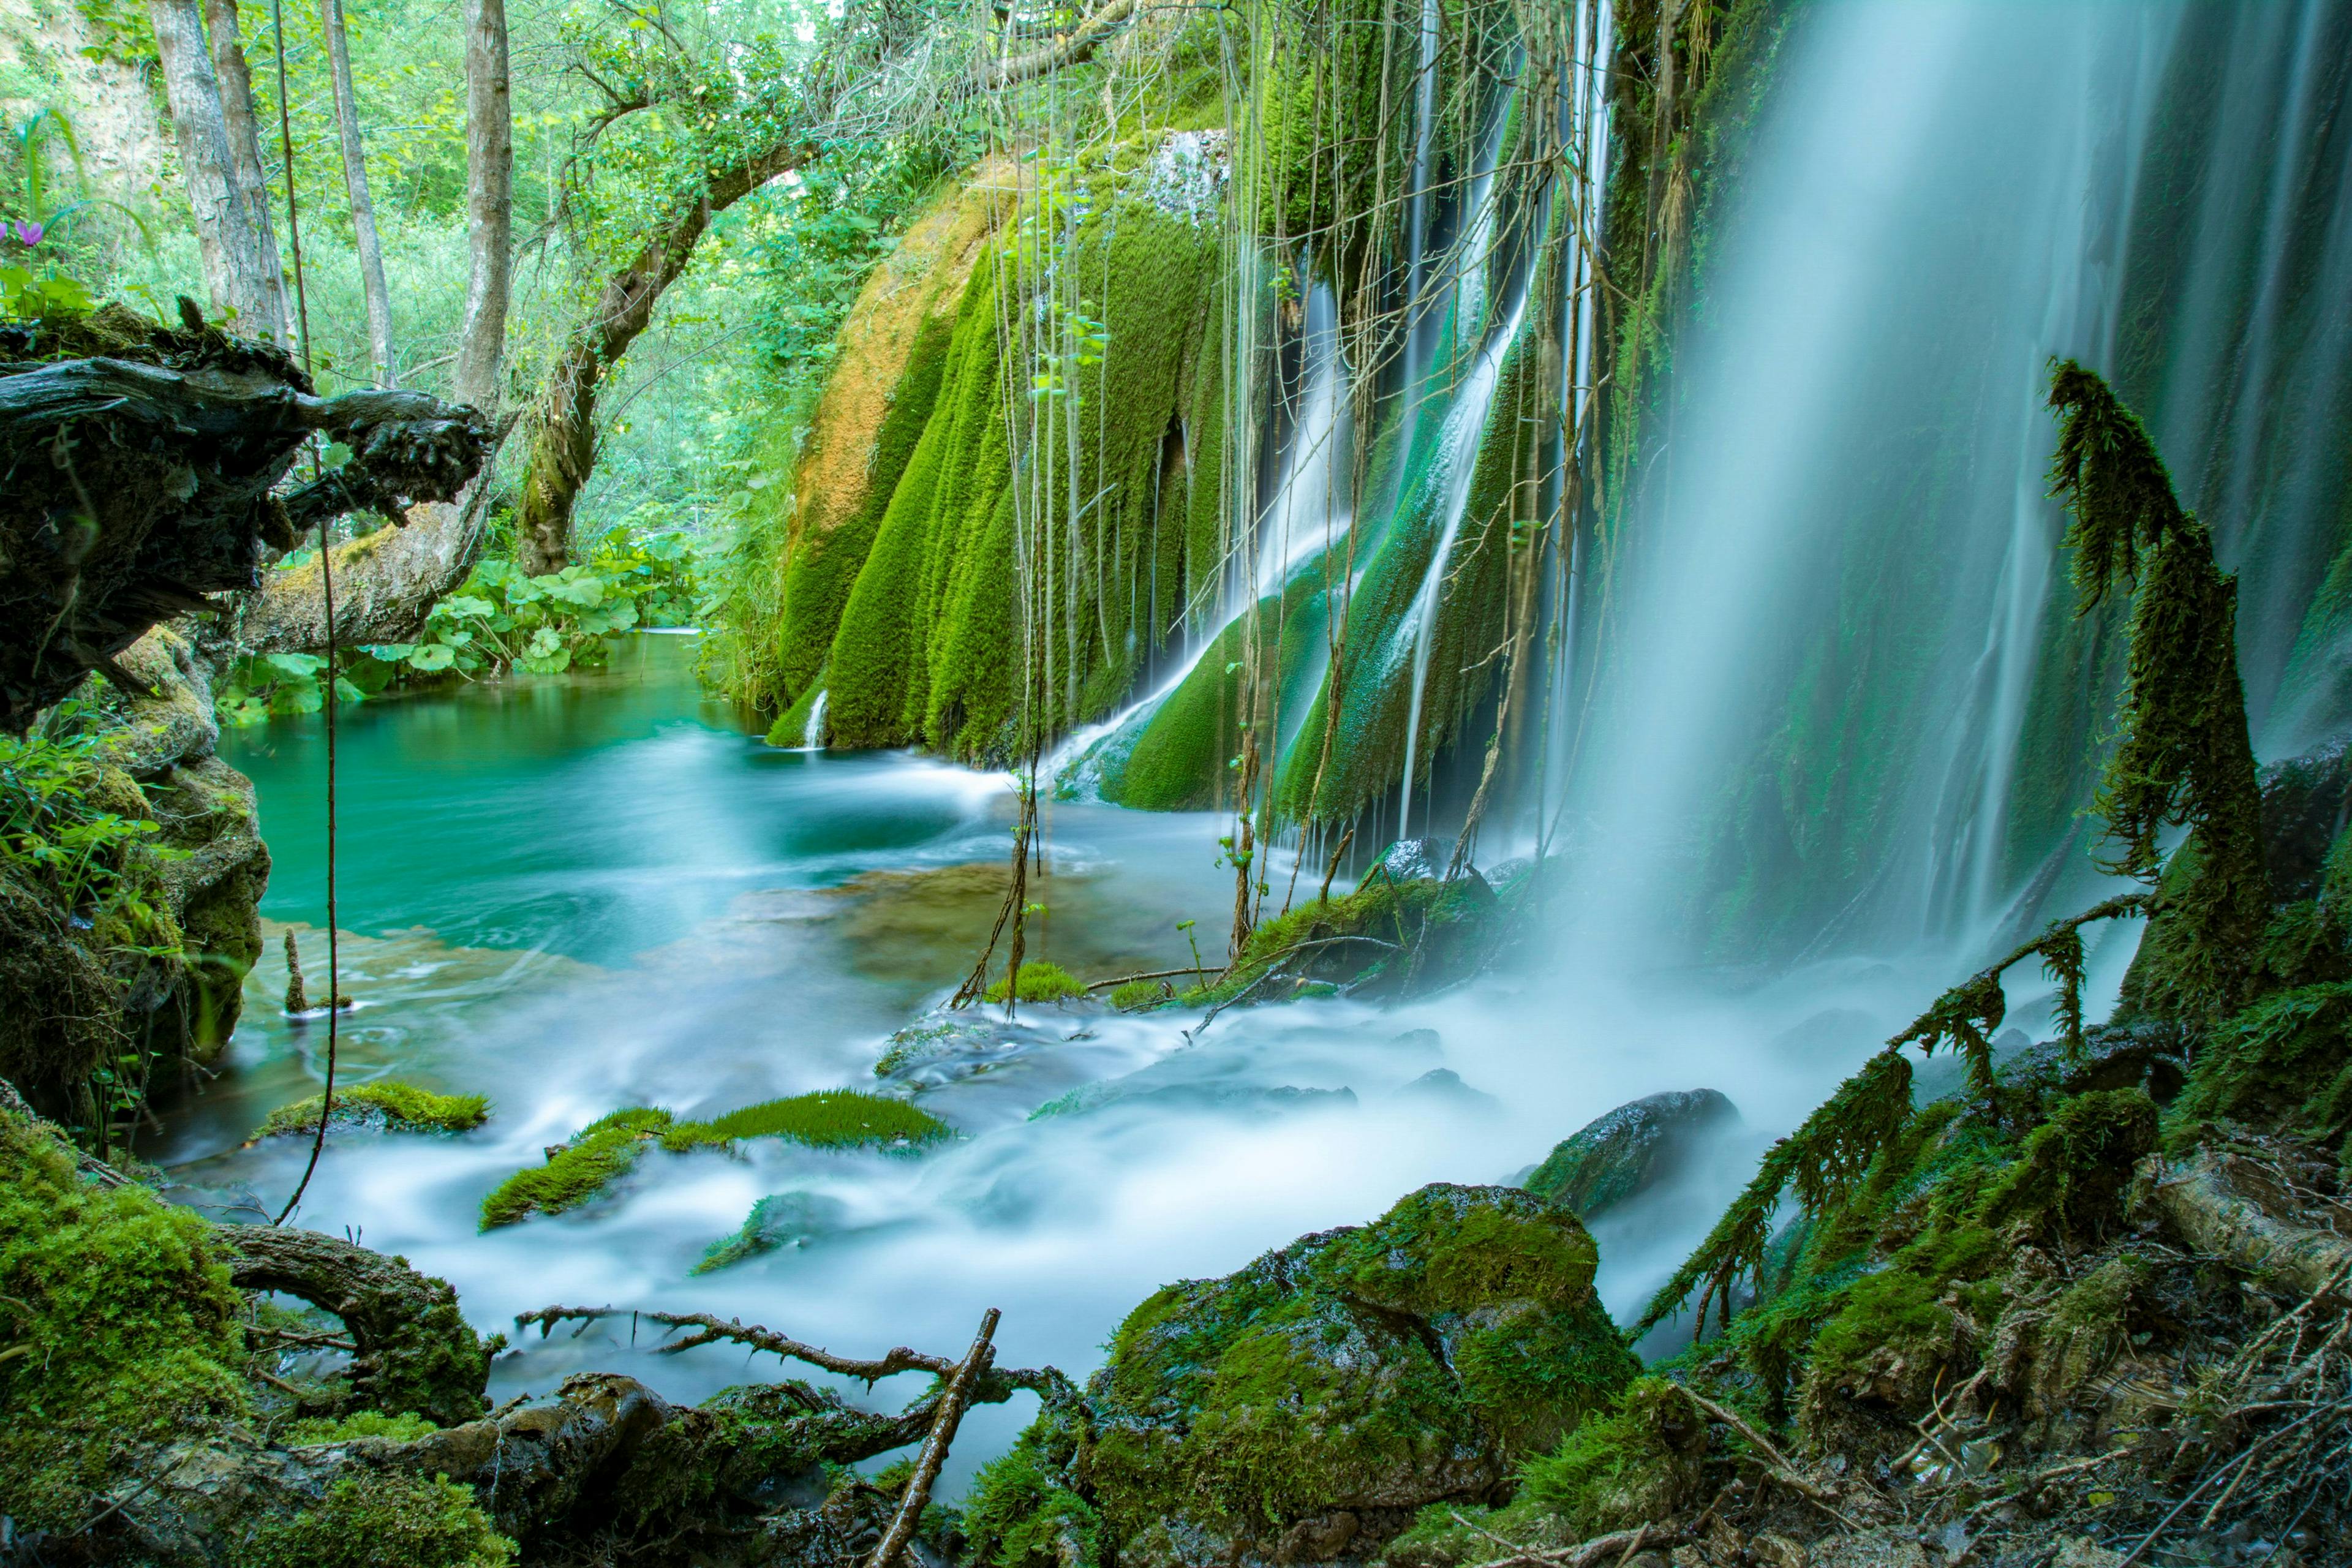 Volturno river waterfalls, scenic view in summer with green moss, Molise region, Italy | Image Credit: © cenz07 - stock.adobe.com